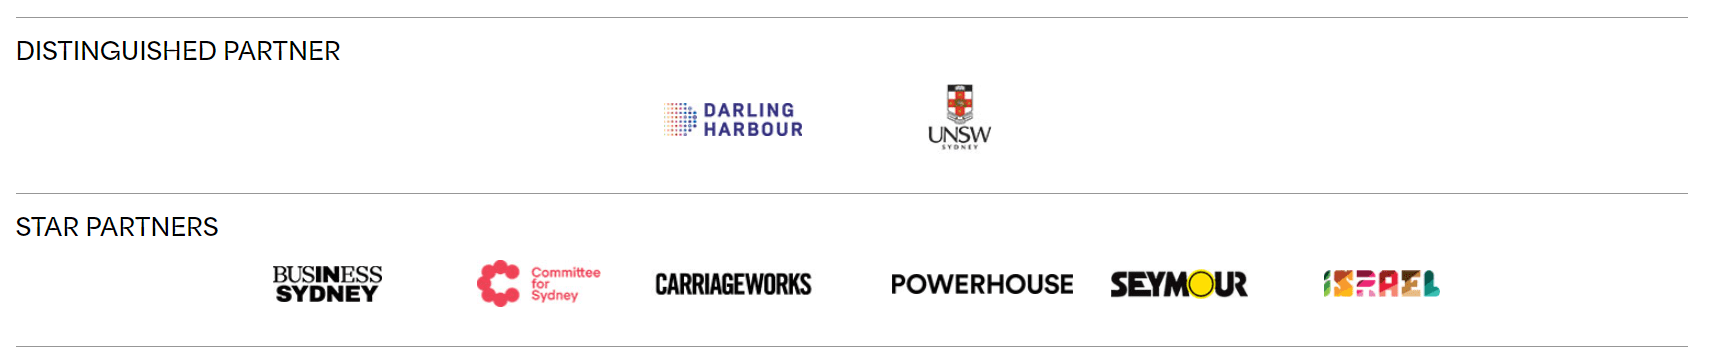 A series of corporate logos under labels: 'Distinguished Partners': Darling Habour and UNSW. Beneath is 'Star Partners': Business in Sydney, Committee for Sydney, Carriageworks, Powerhouse, Seymour, and Israel.